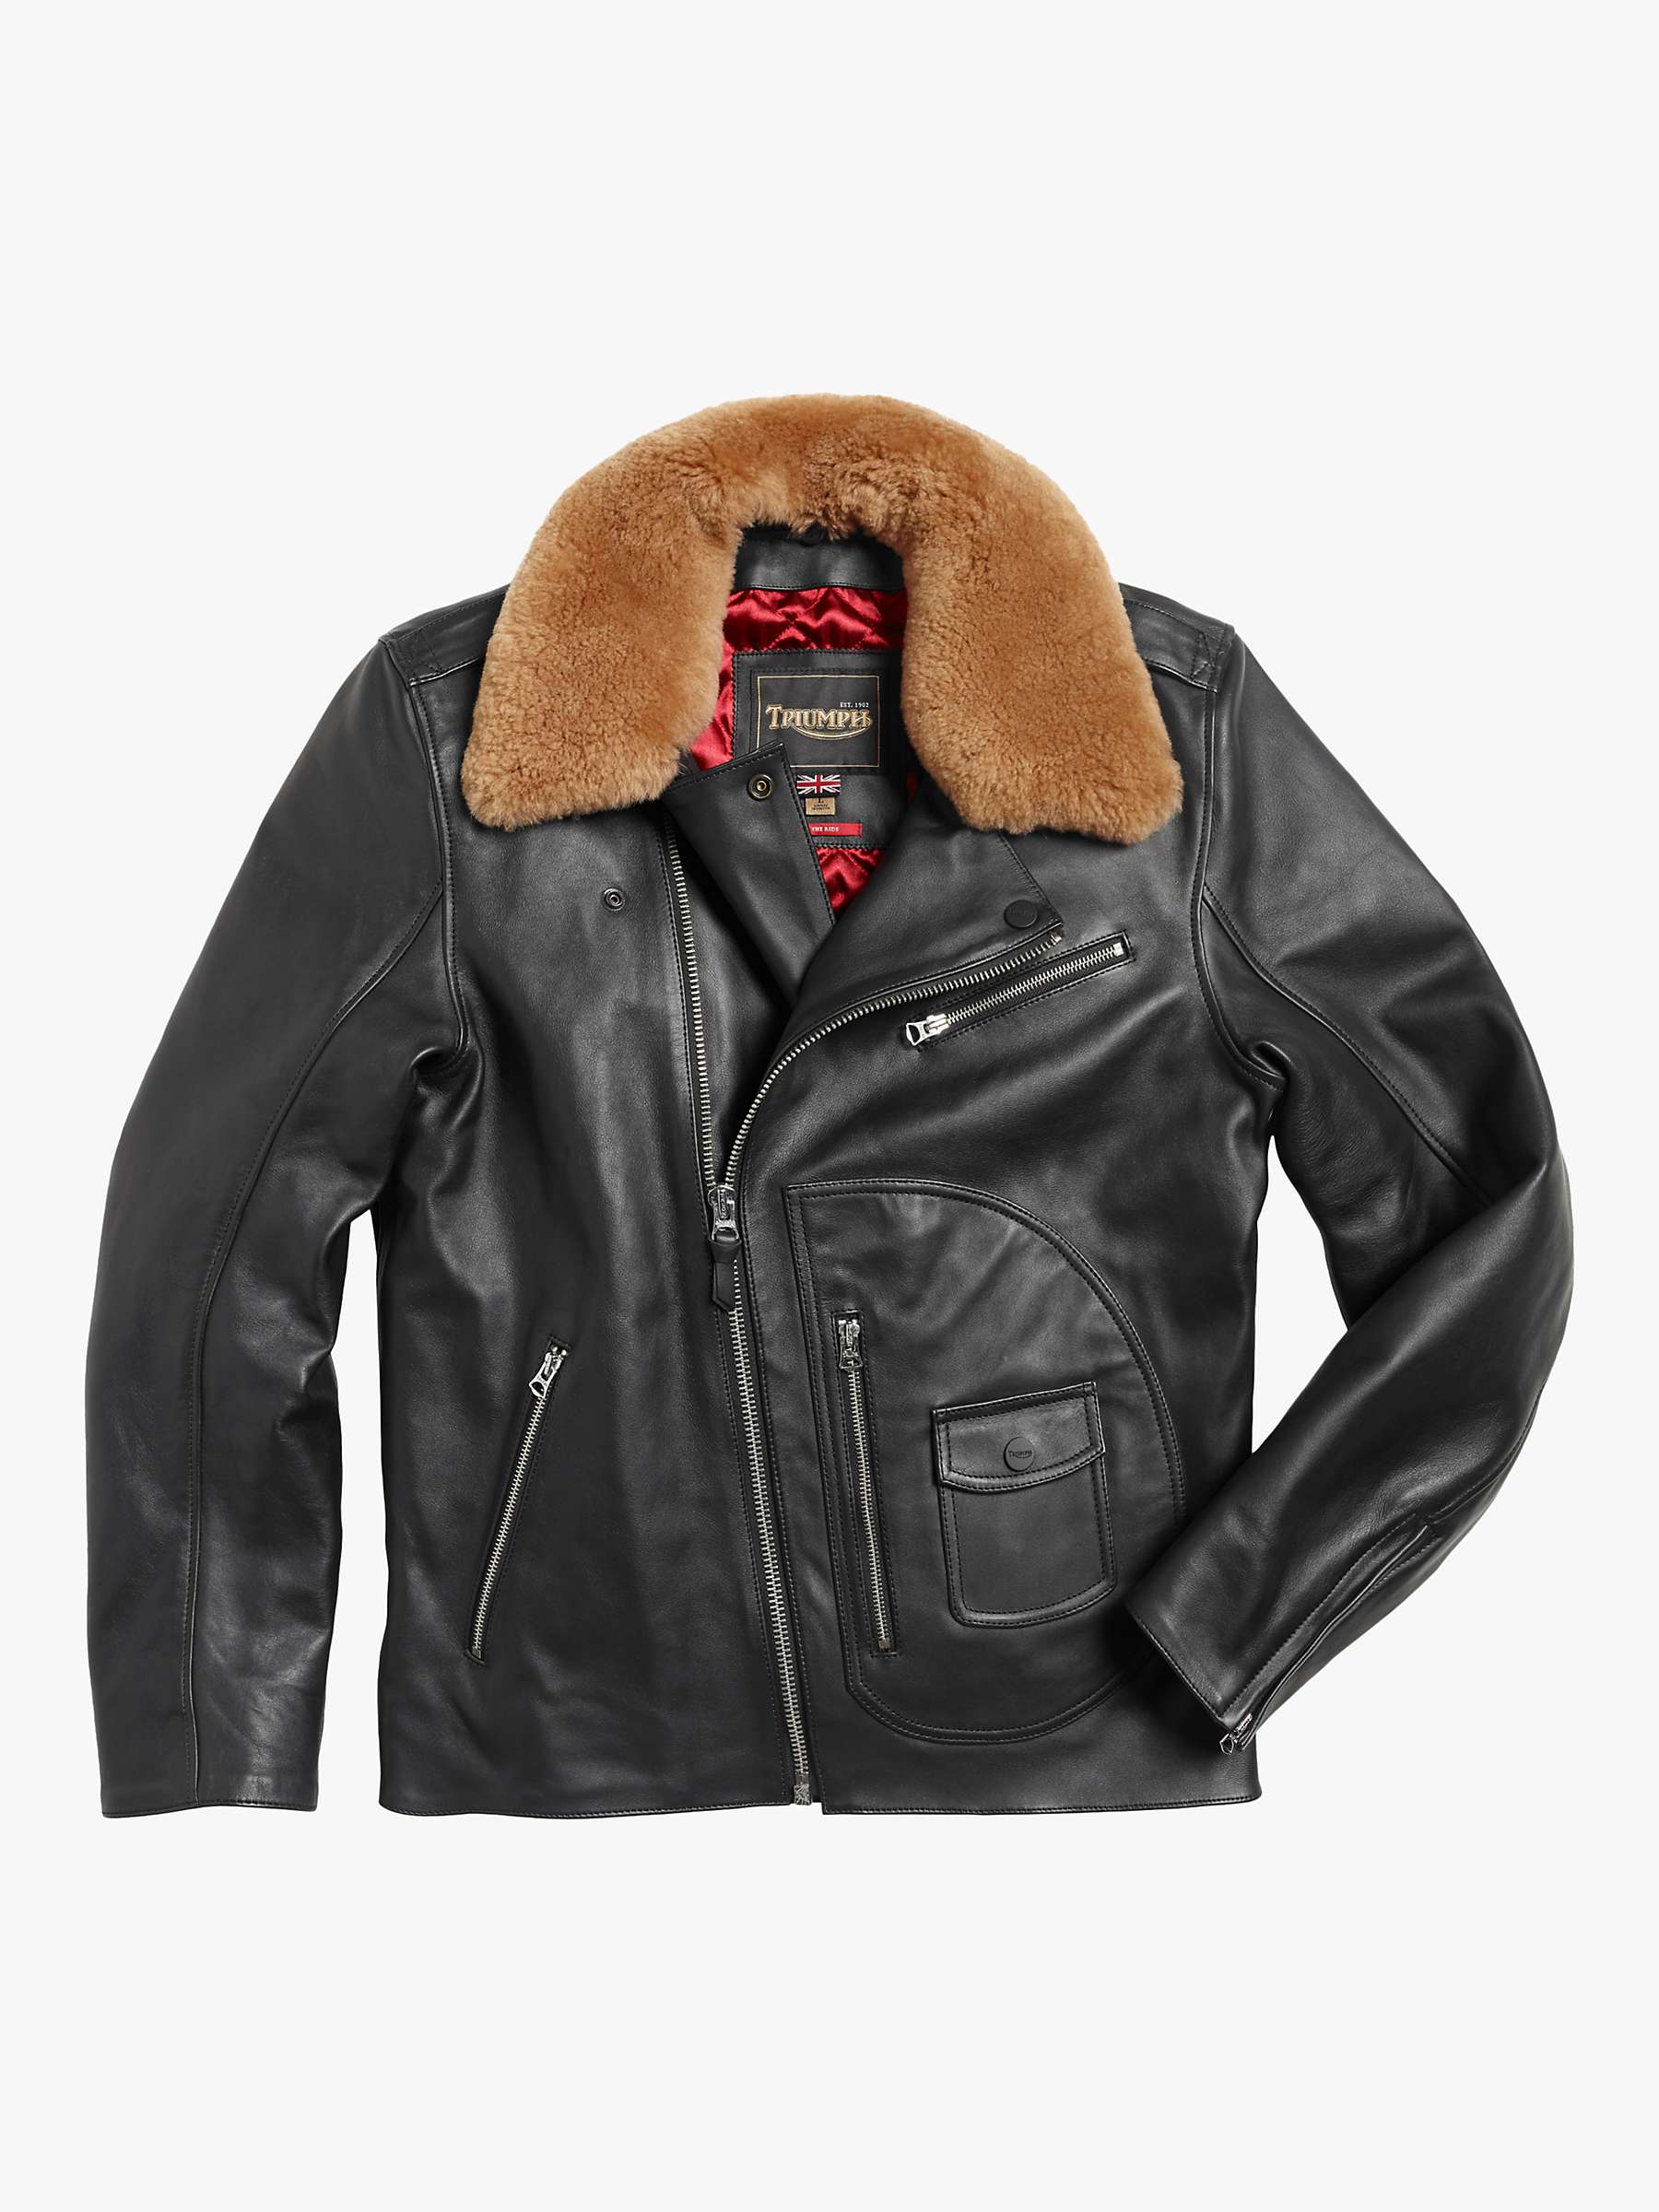 Buy Triumph Motorcycles Rexford Leather Jacket Online at johnlewis.com